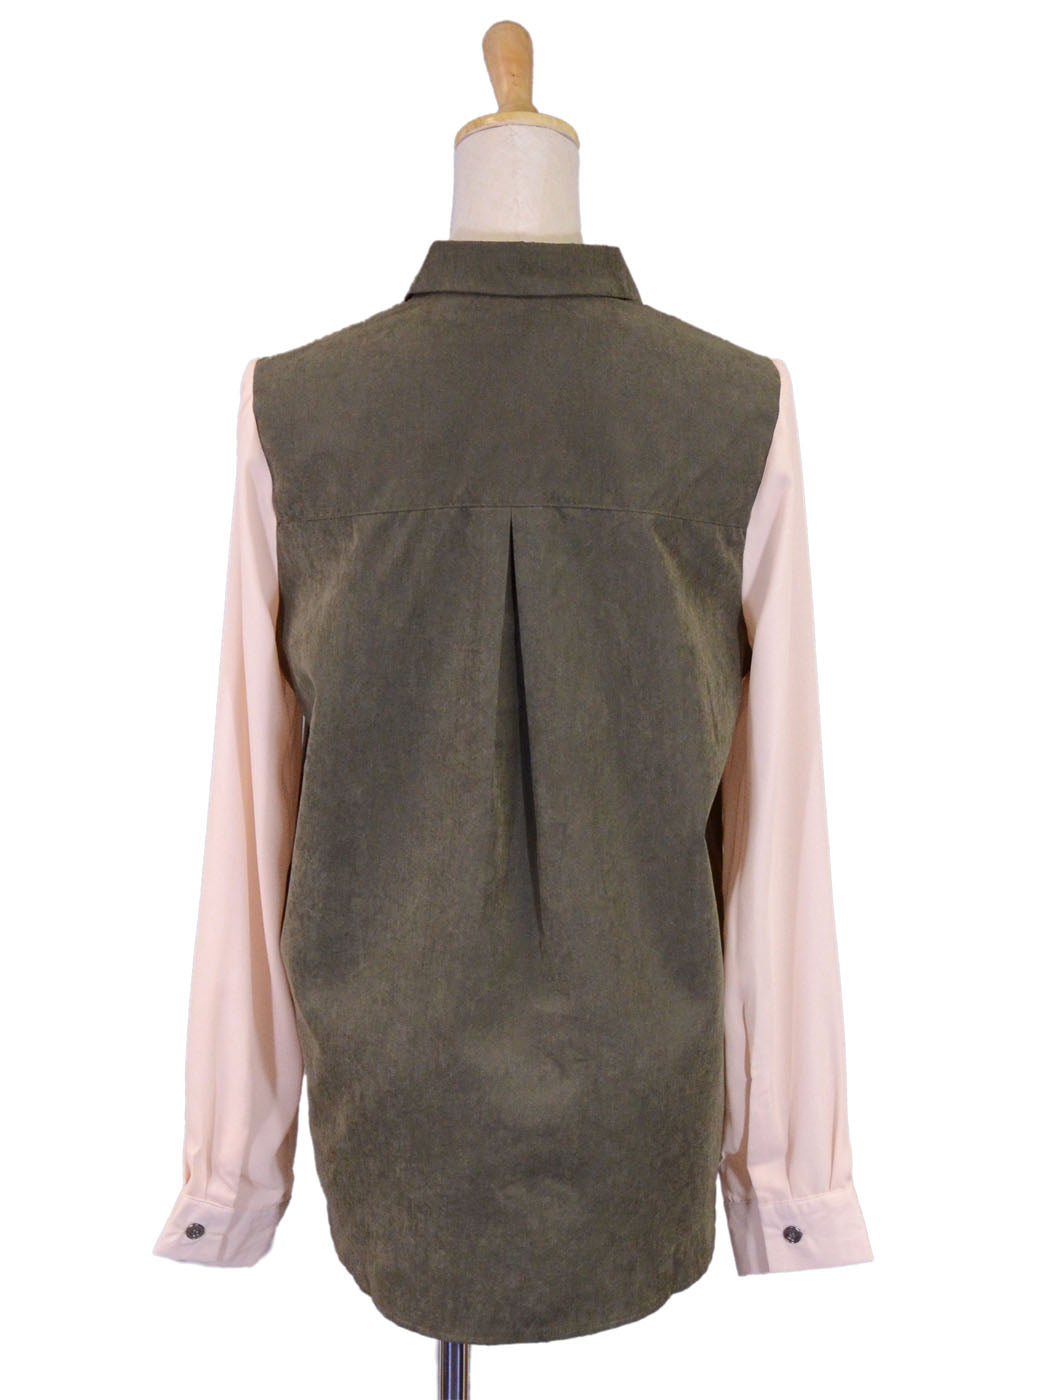 Everly Two Toned Dual Fabric Button Down Collared Blouse With Chiffon Sleeves - ALILANG.COM